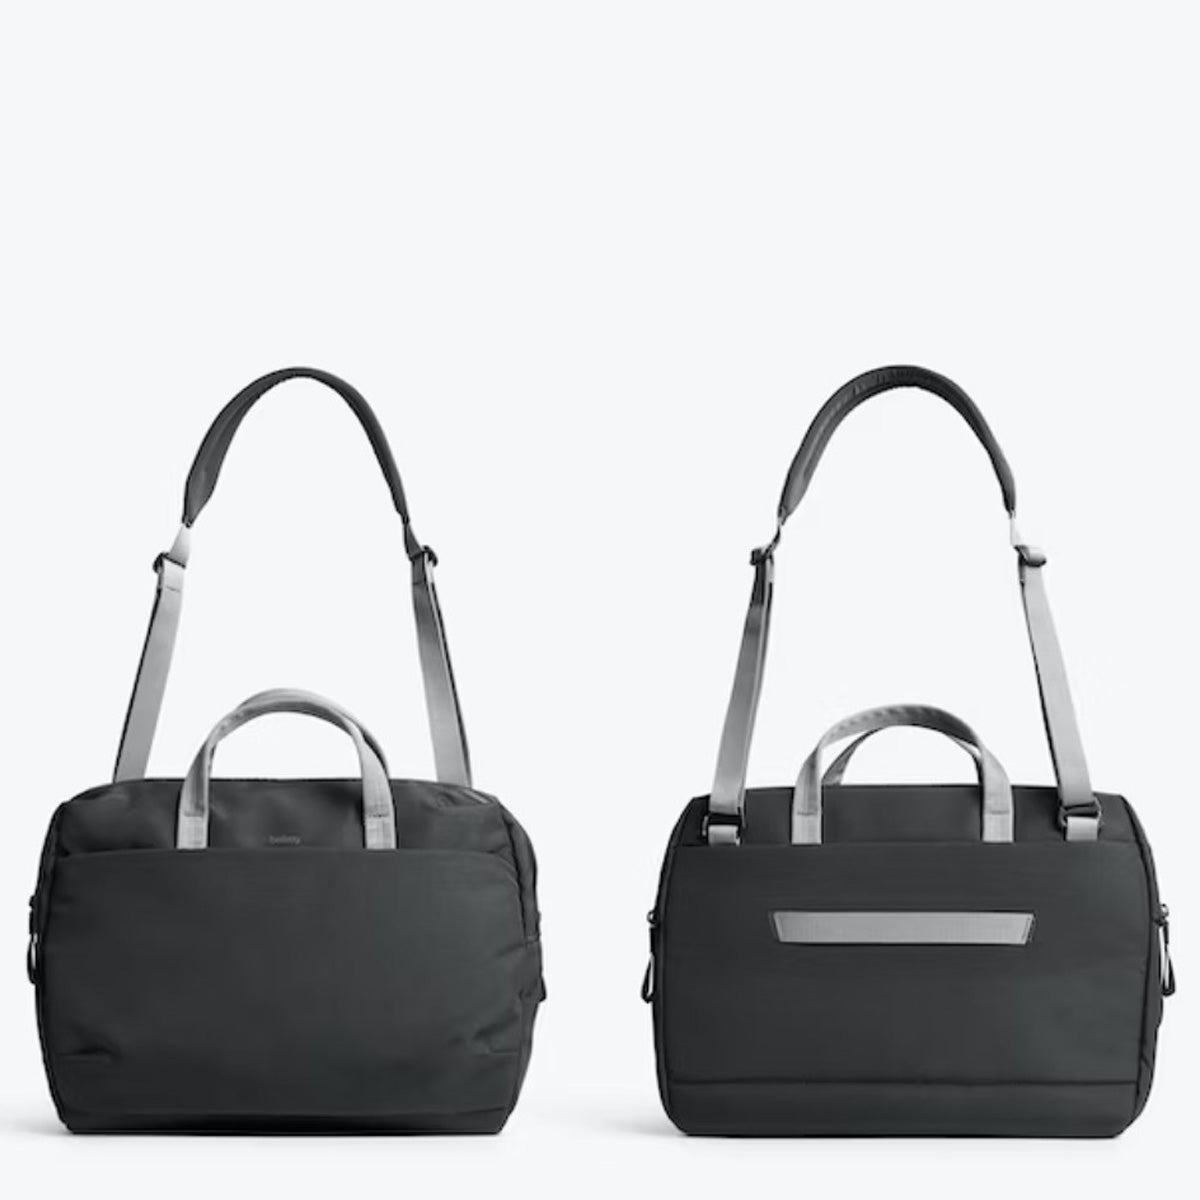 Bags - Leather, sling, handbags, and luggage bags. Bellroy, Tumi, BRIC ...